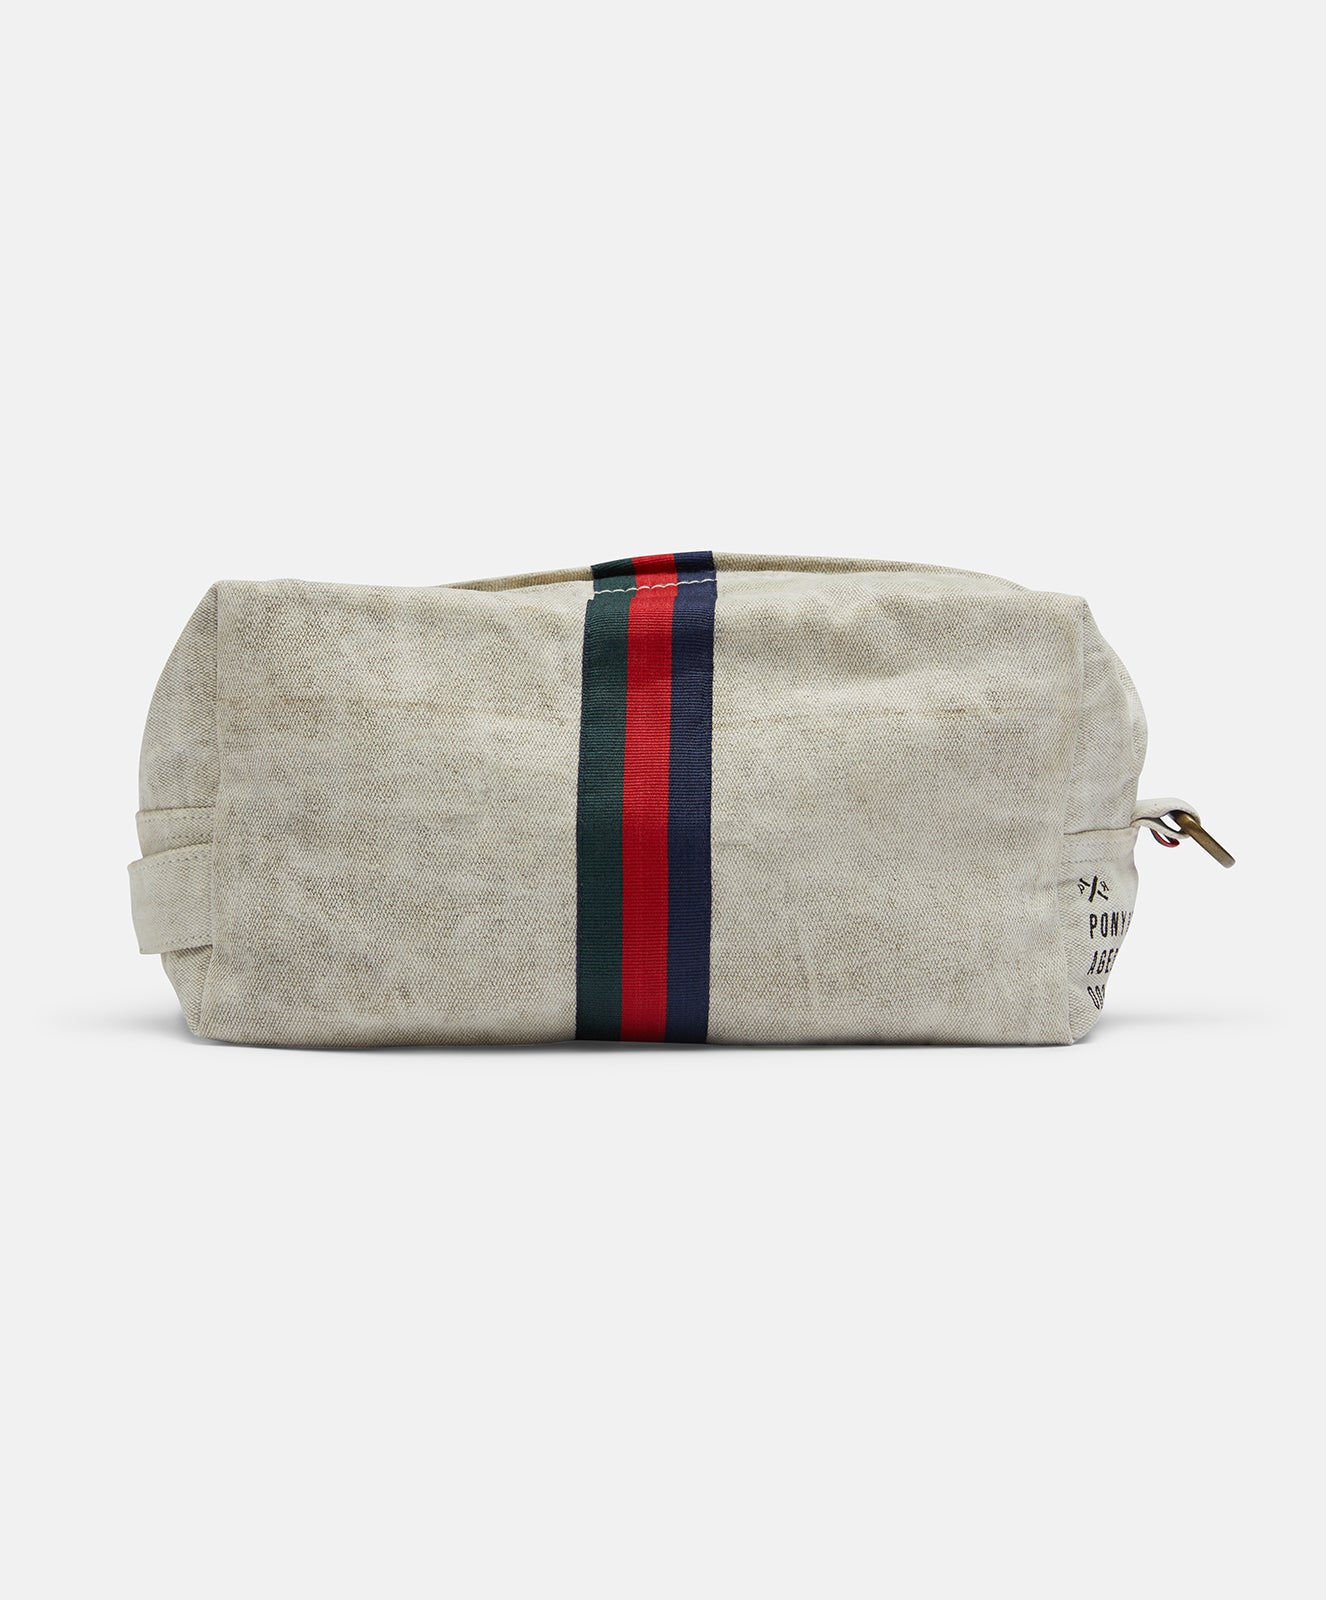 Escapee Canvas Toiletry Bag | Upcycled | Natural